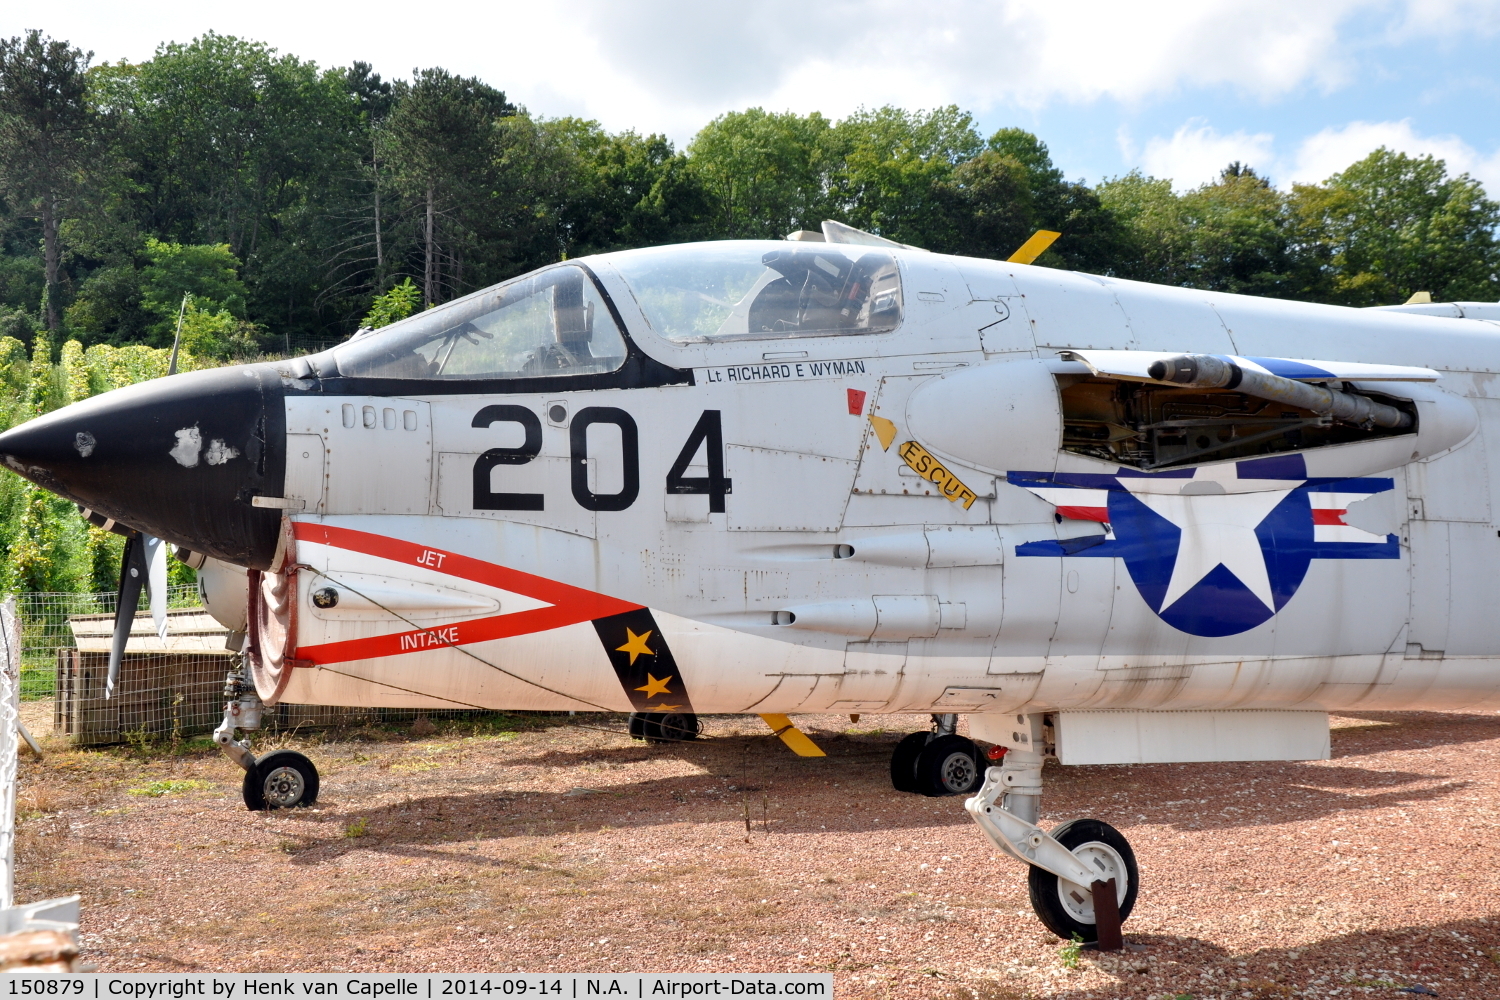 150879, Vought F-8E(FN) Crusader C/N 1202, Front fuselage of F-8E(FN) Crusader at the Chateau de Savigny aircraft museum. Flew with Aeronavale, but shown in US Navy c/s.